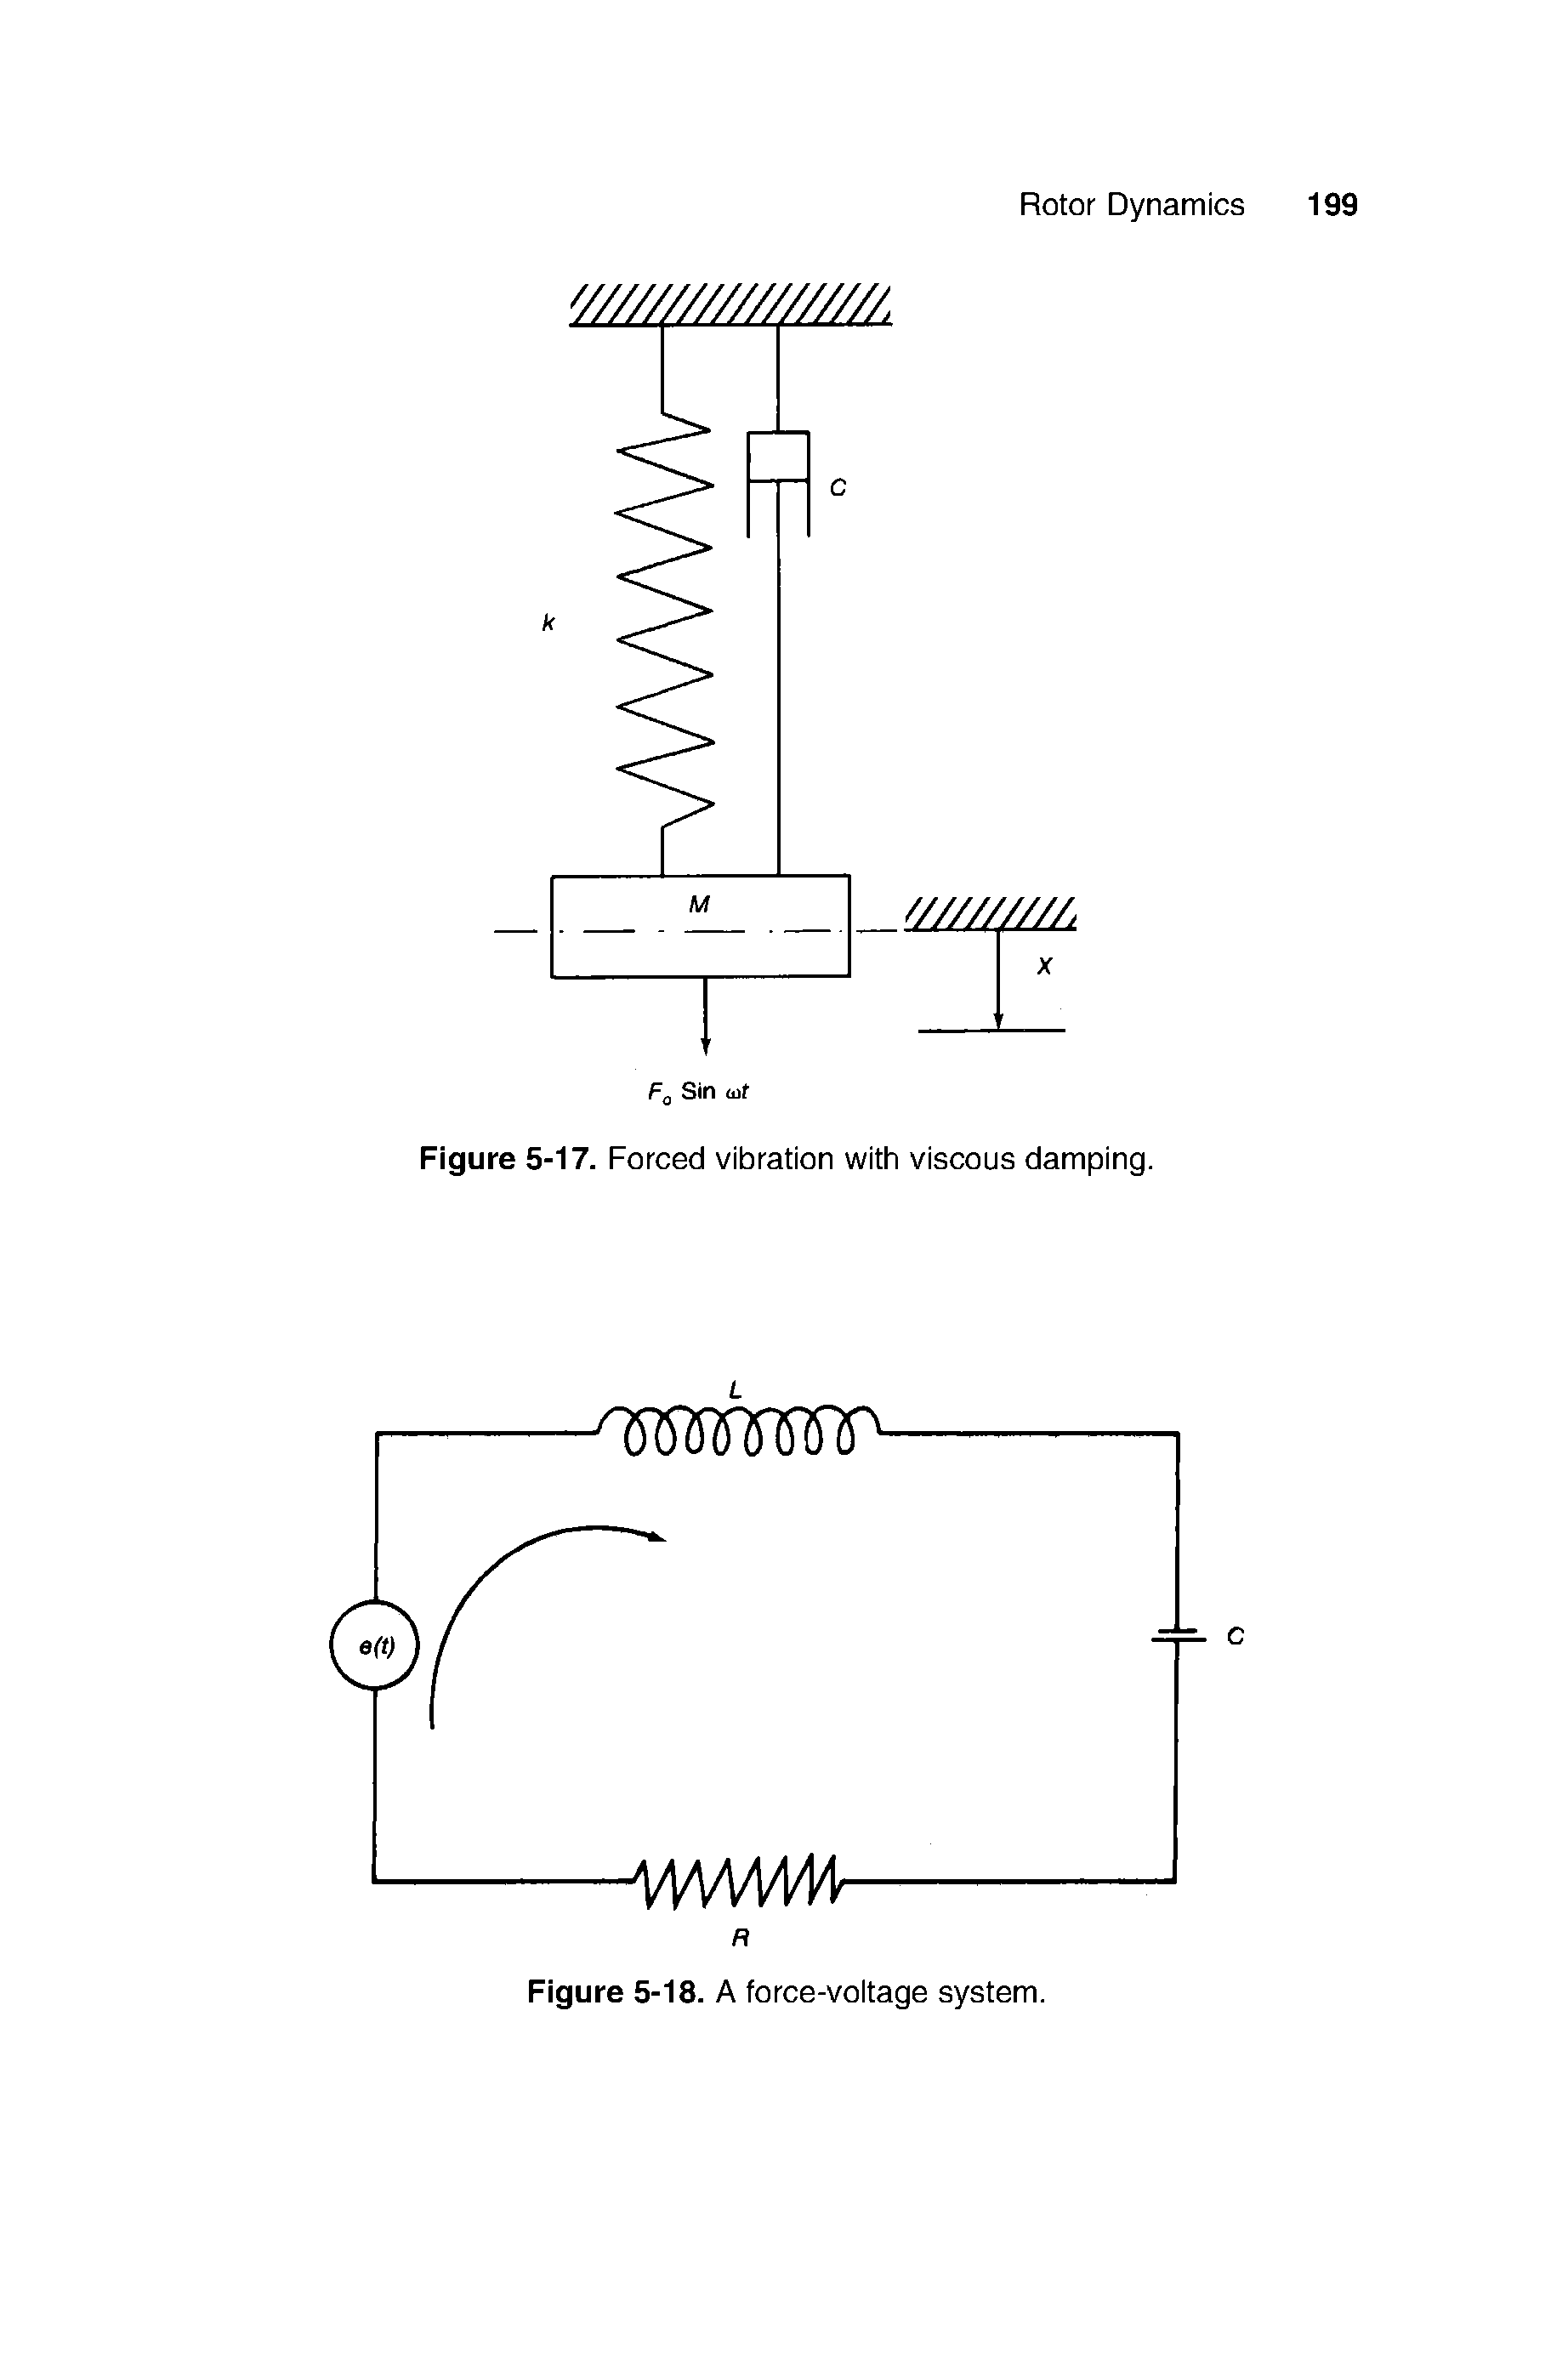 Figure 5-17. Forced vibration with viscous damping.